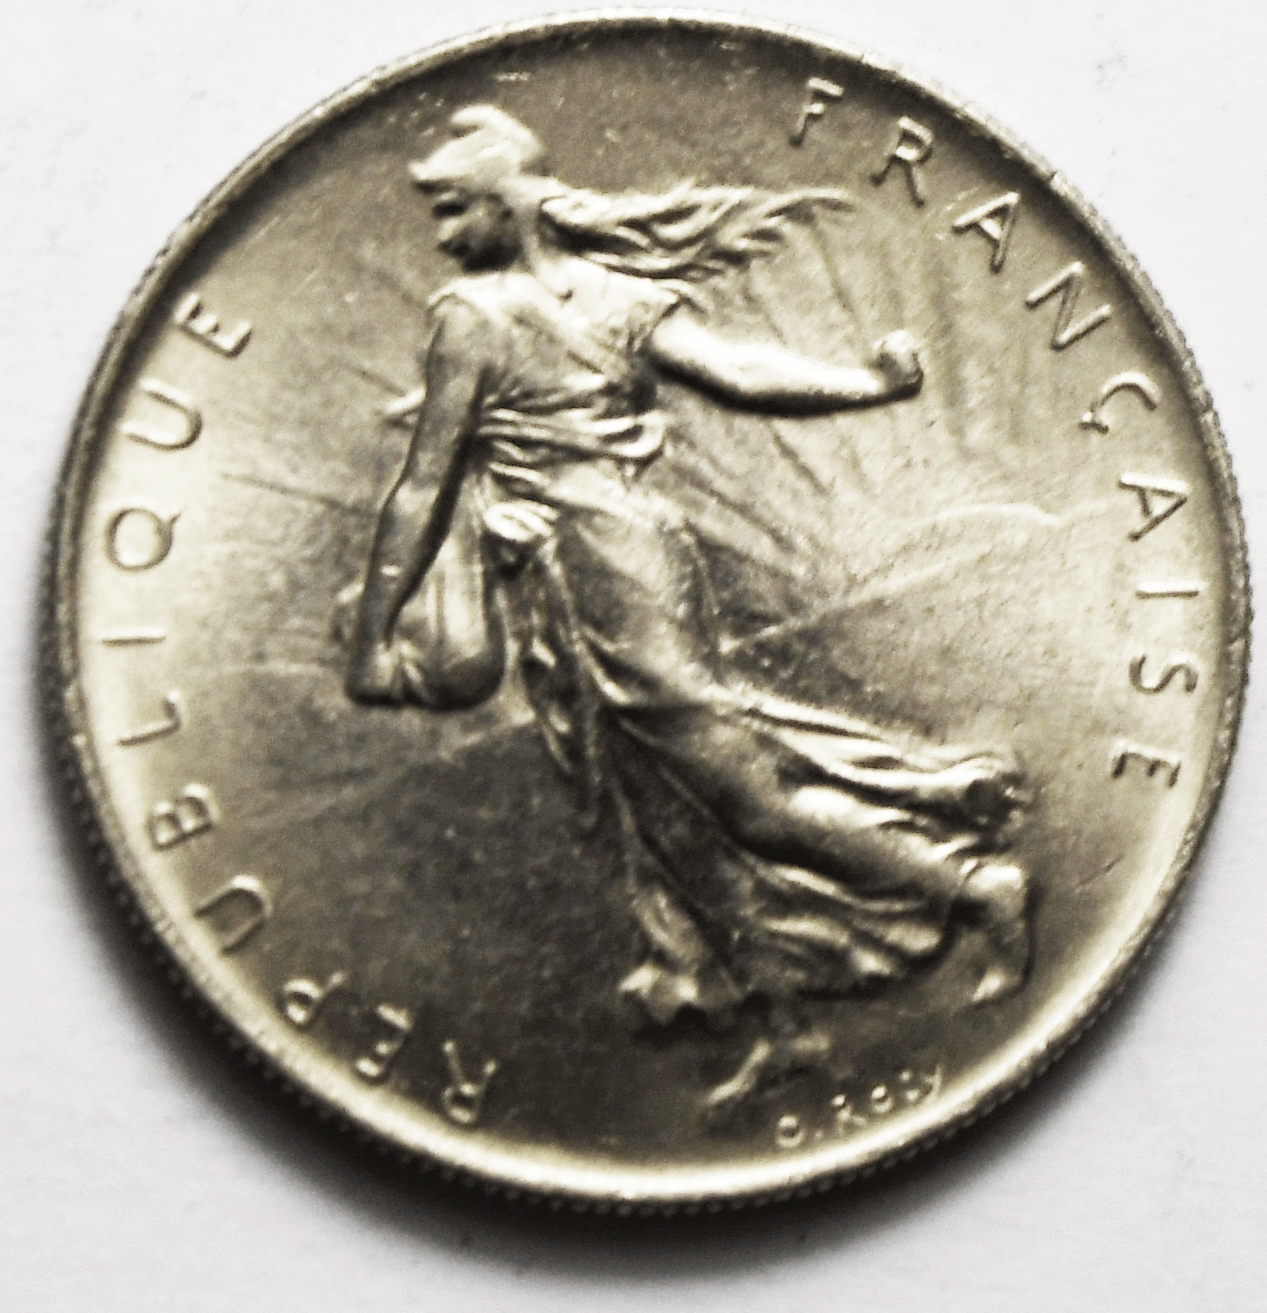 1960 France One Franc Nickel Coin KM# 925.1